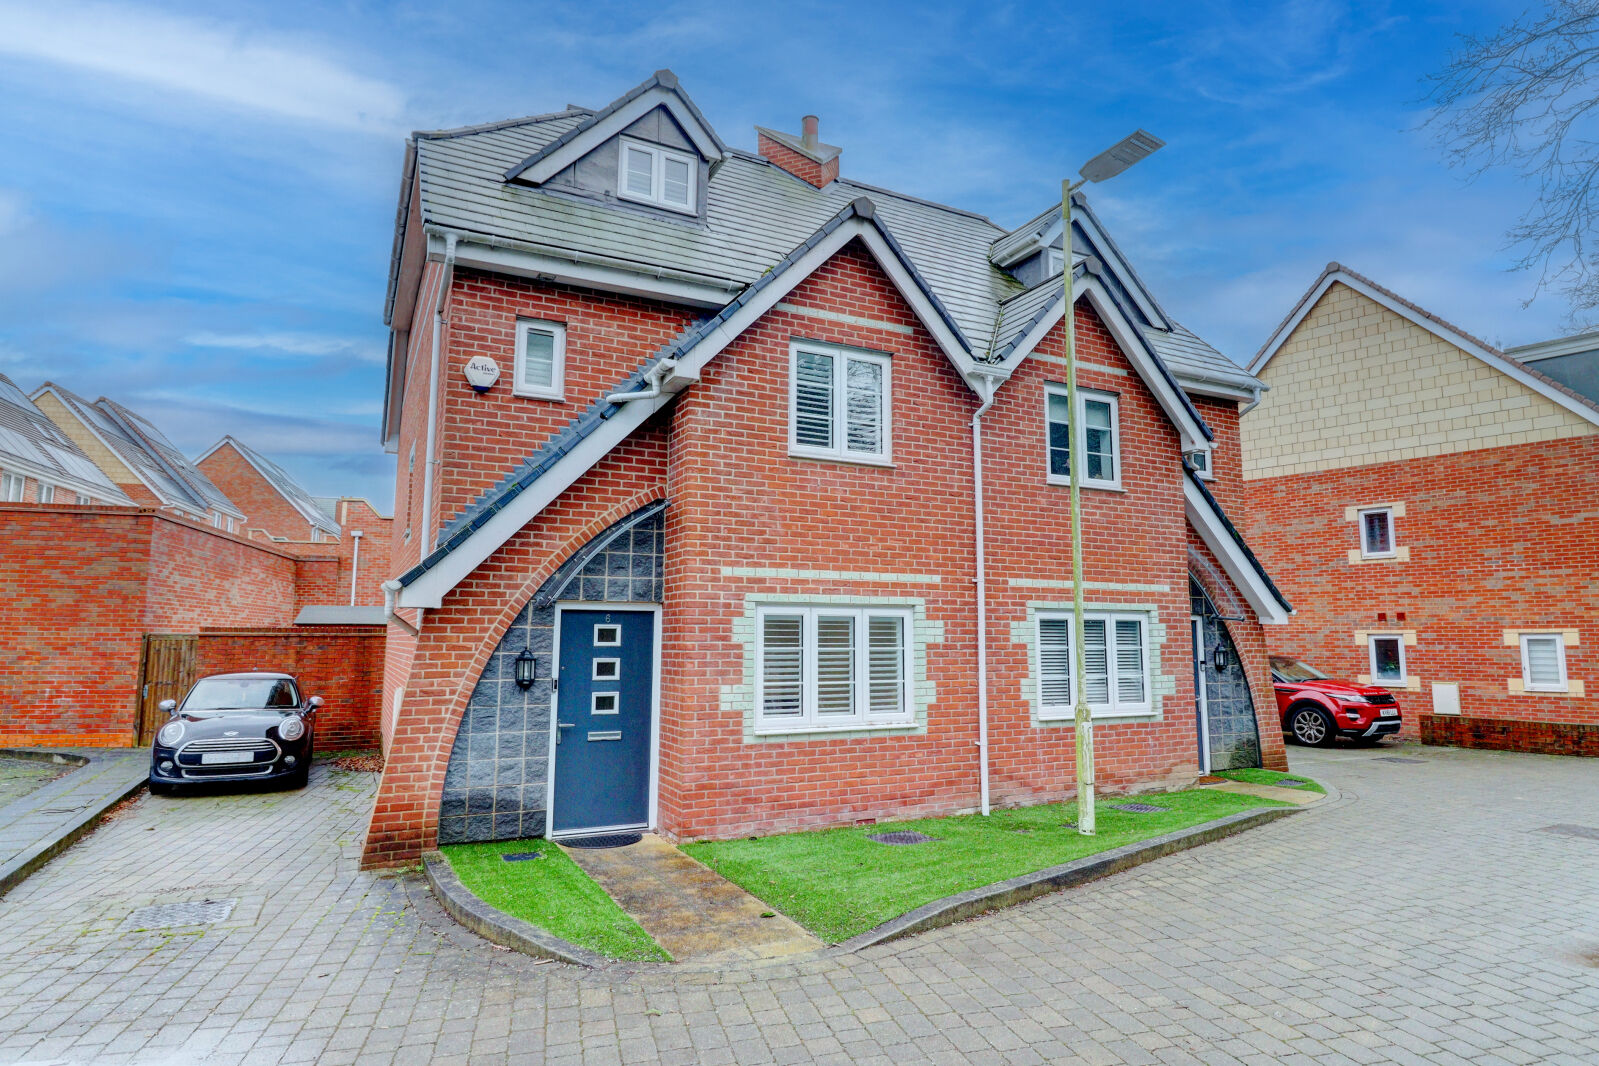 3 bedroom semi detached house for sale California Way, High Wycombe, HP11, main image